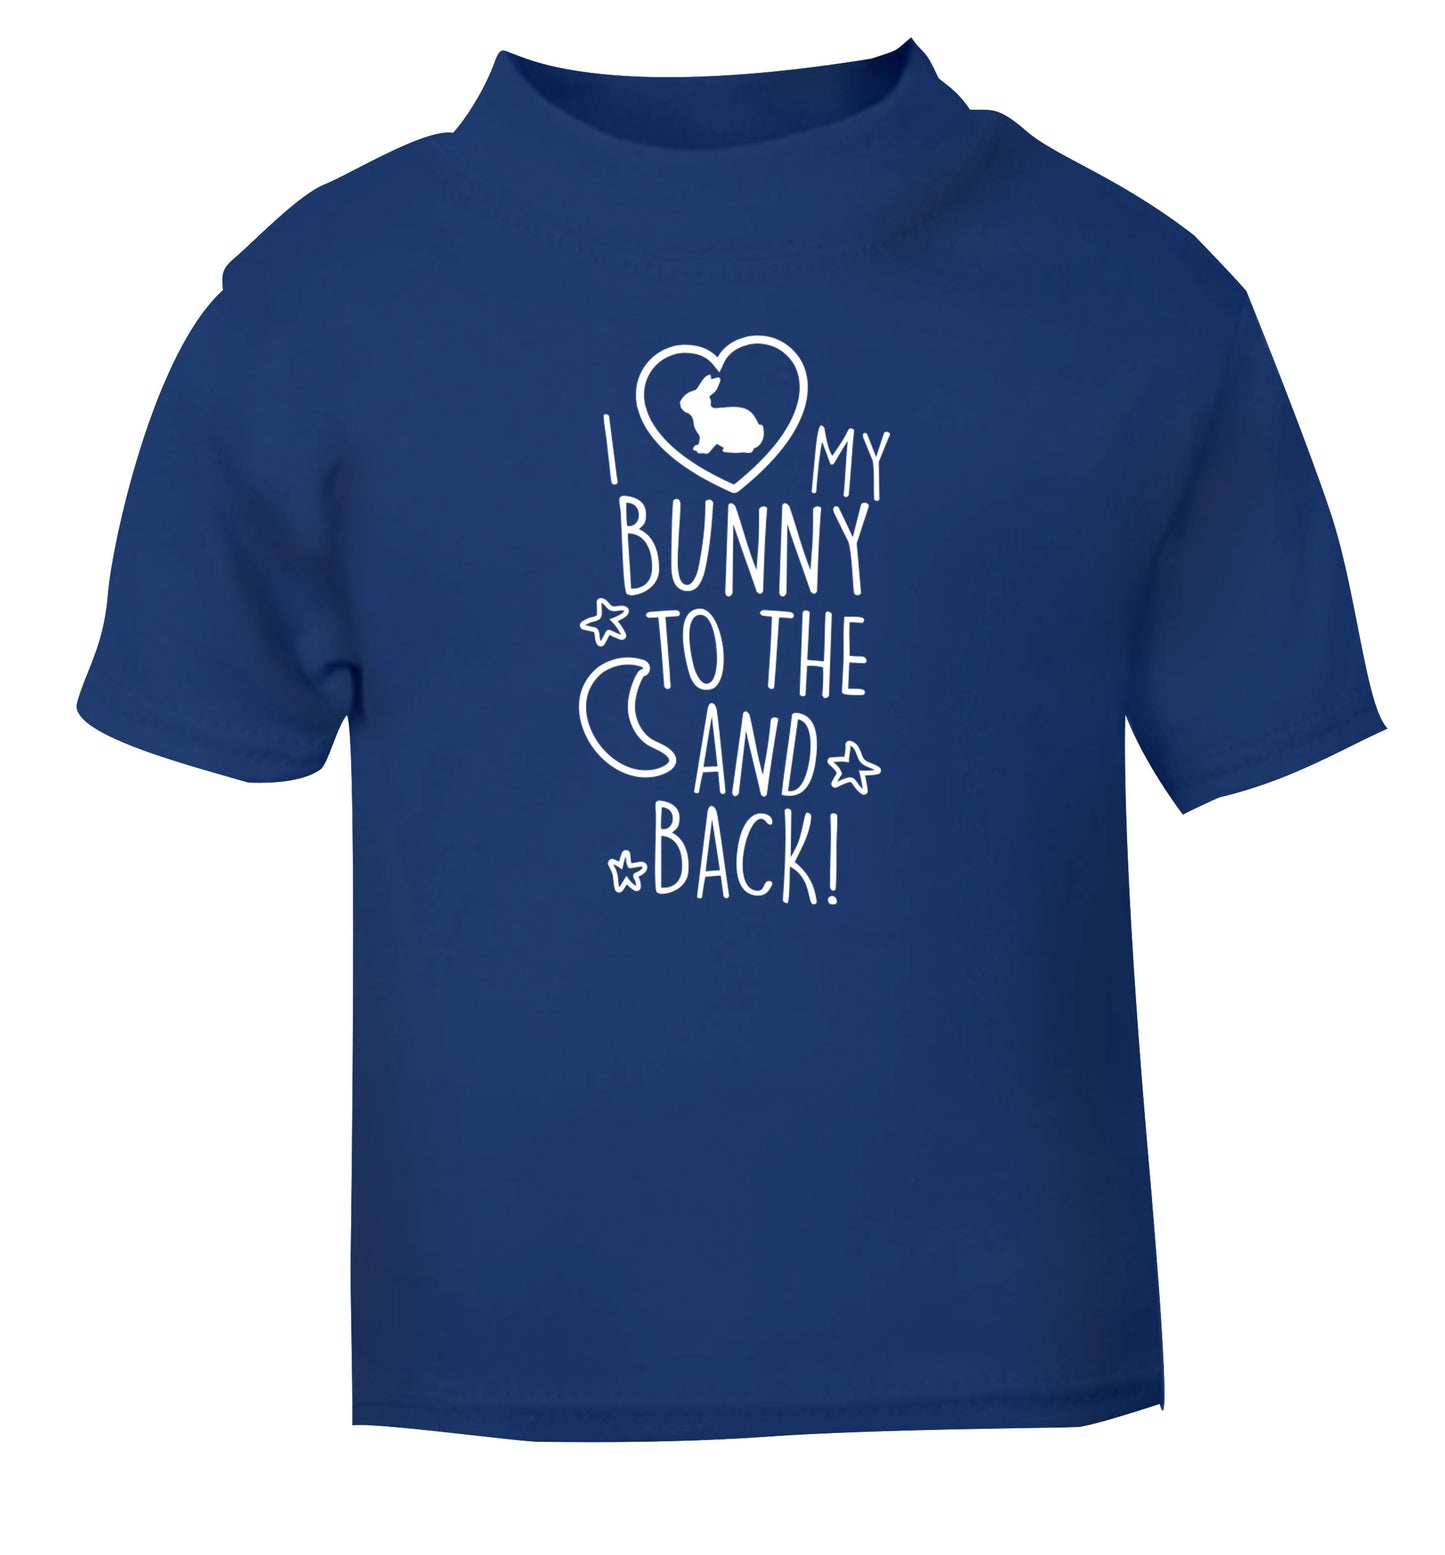 I love my bunny to the moon and back blue Baby Toddler Tshirt 2 Years